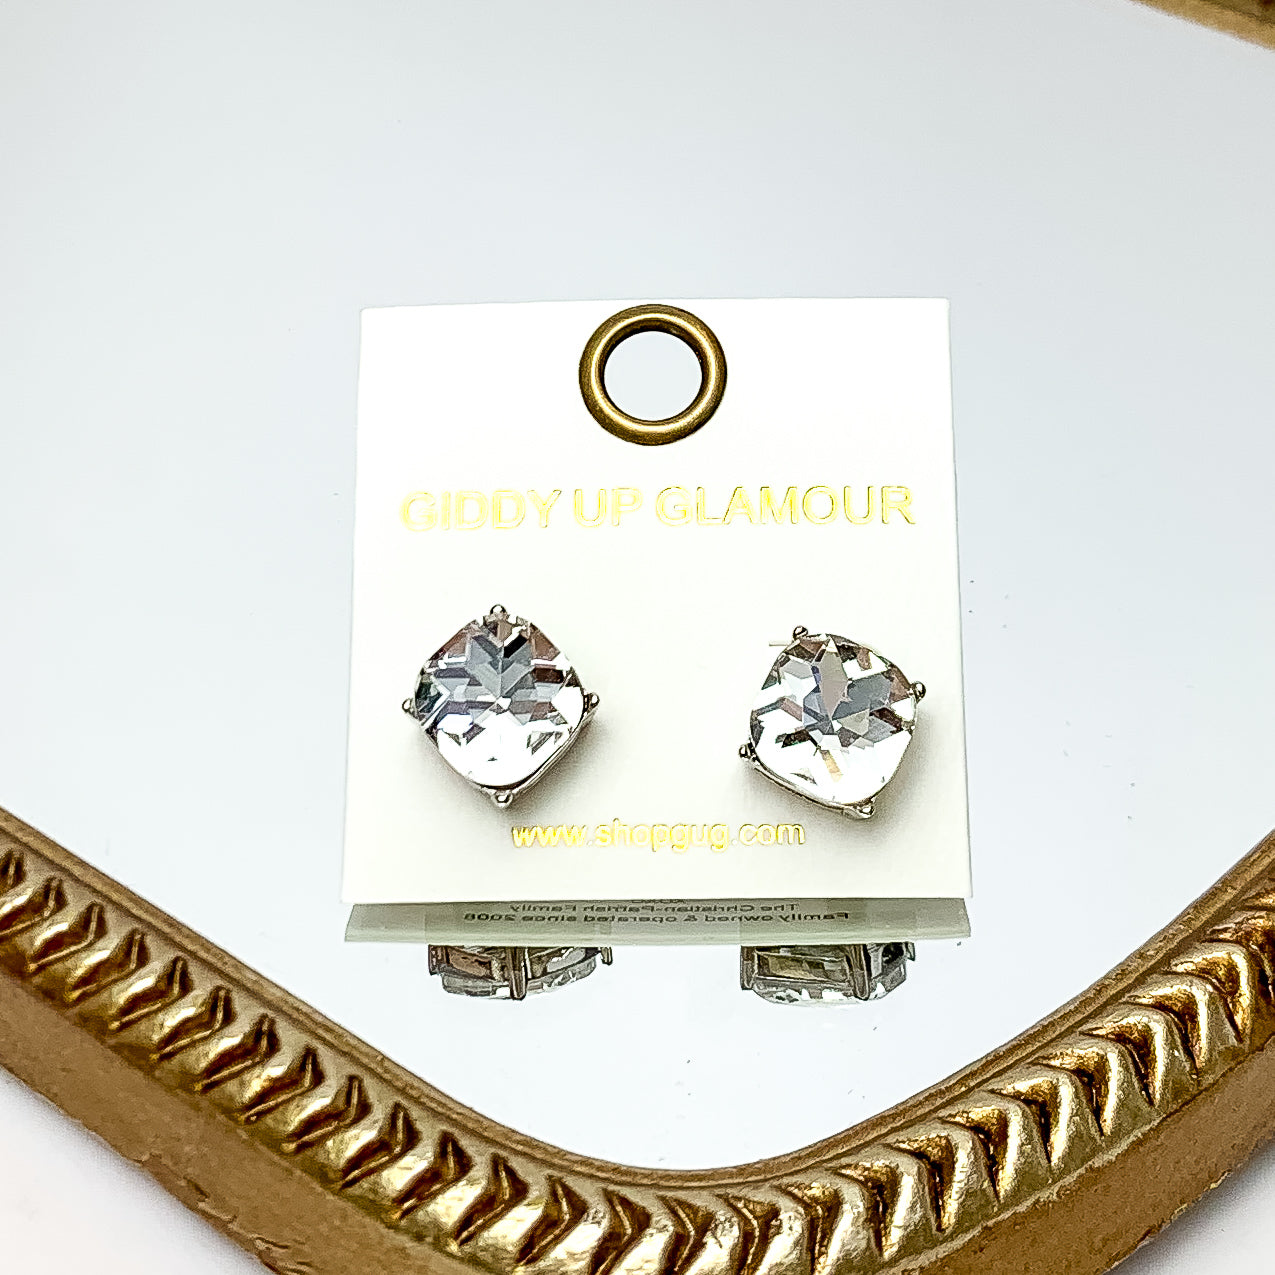 Large Clear Crystal Stud Earrings in Silver Tone. These earrings are pictured laying on a gold trimmed mirror.